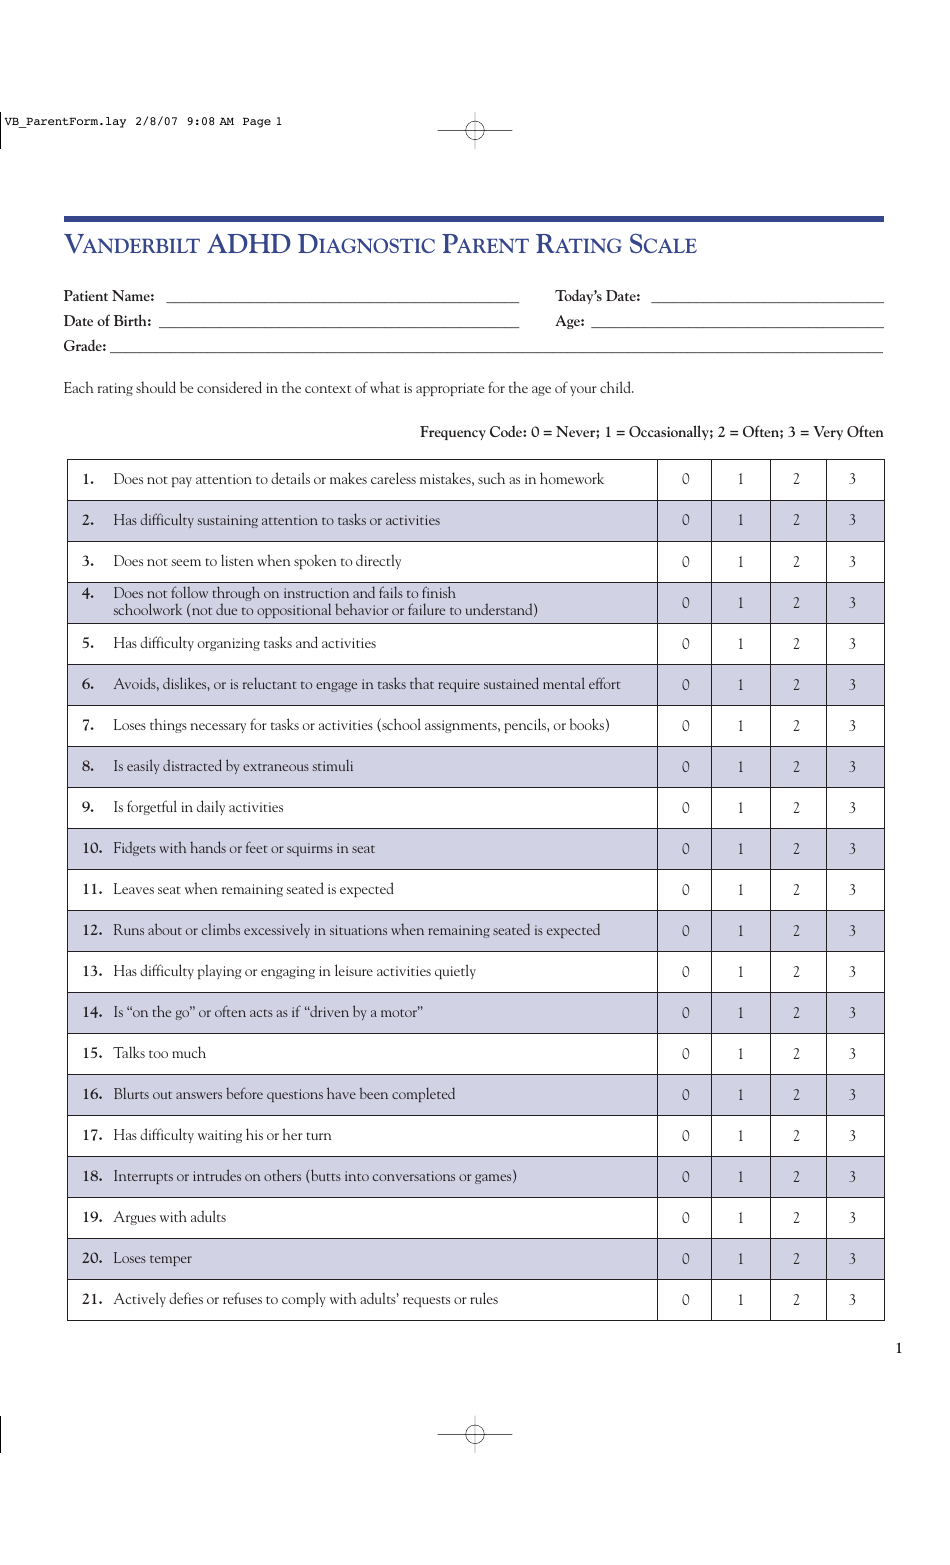 conners-behavior-rating-scale-printable